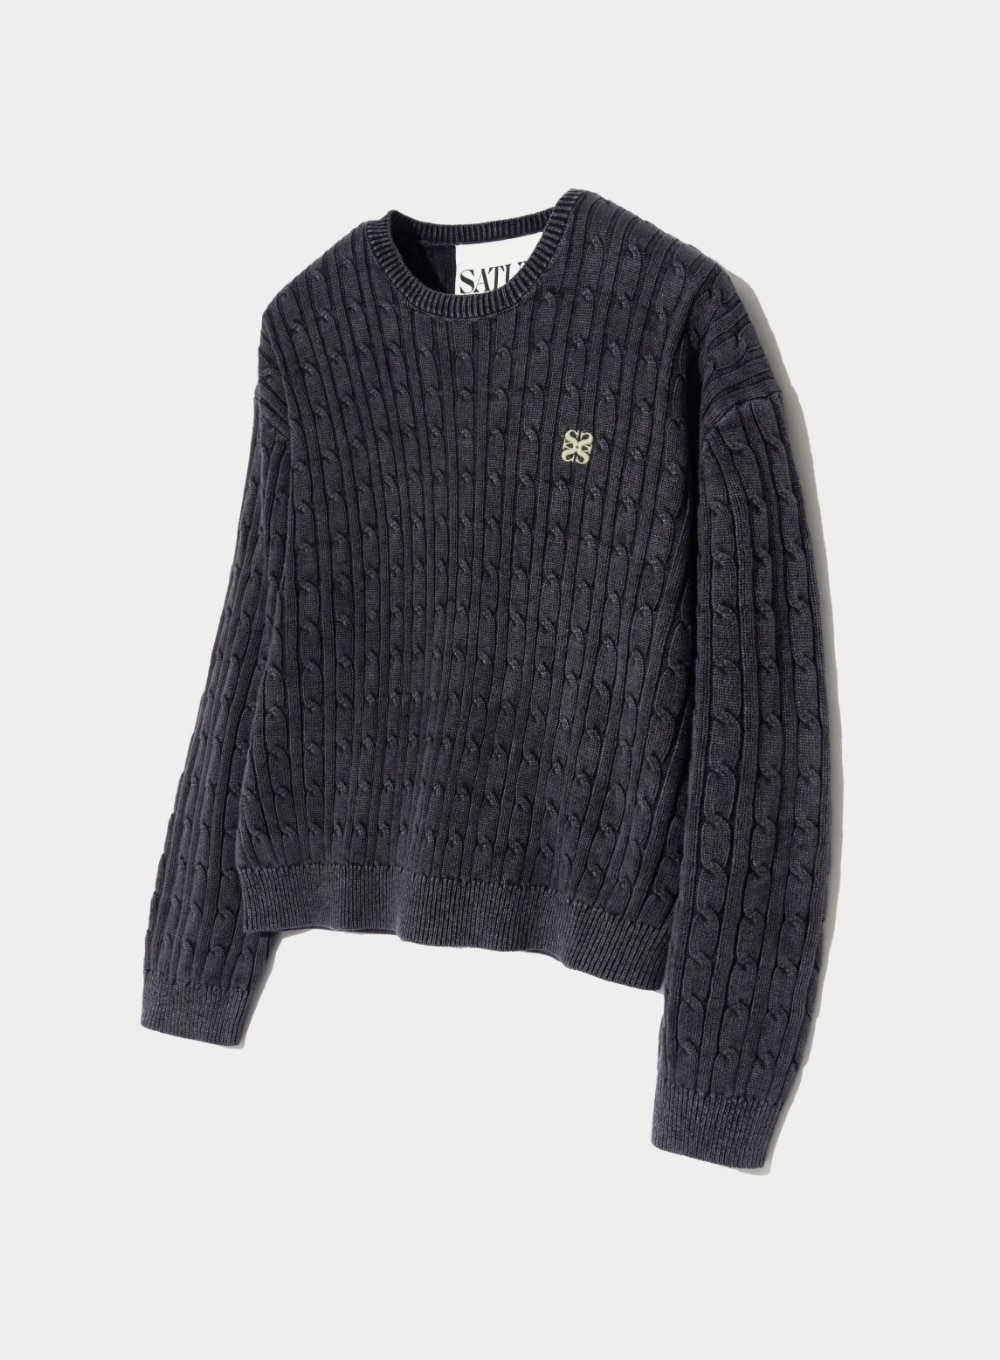 Classic Dyed Cable Knit - Night Black